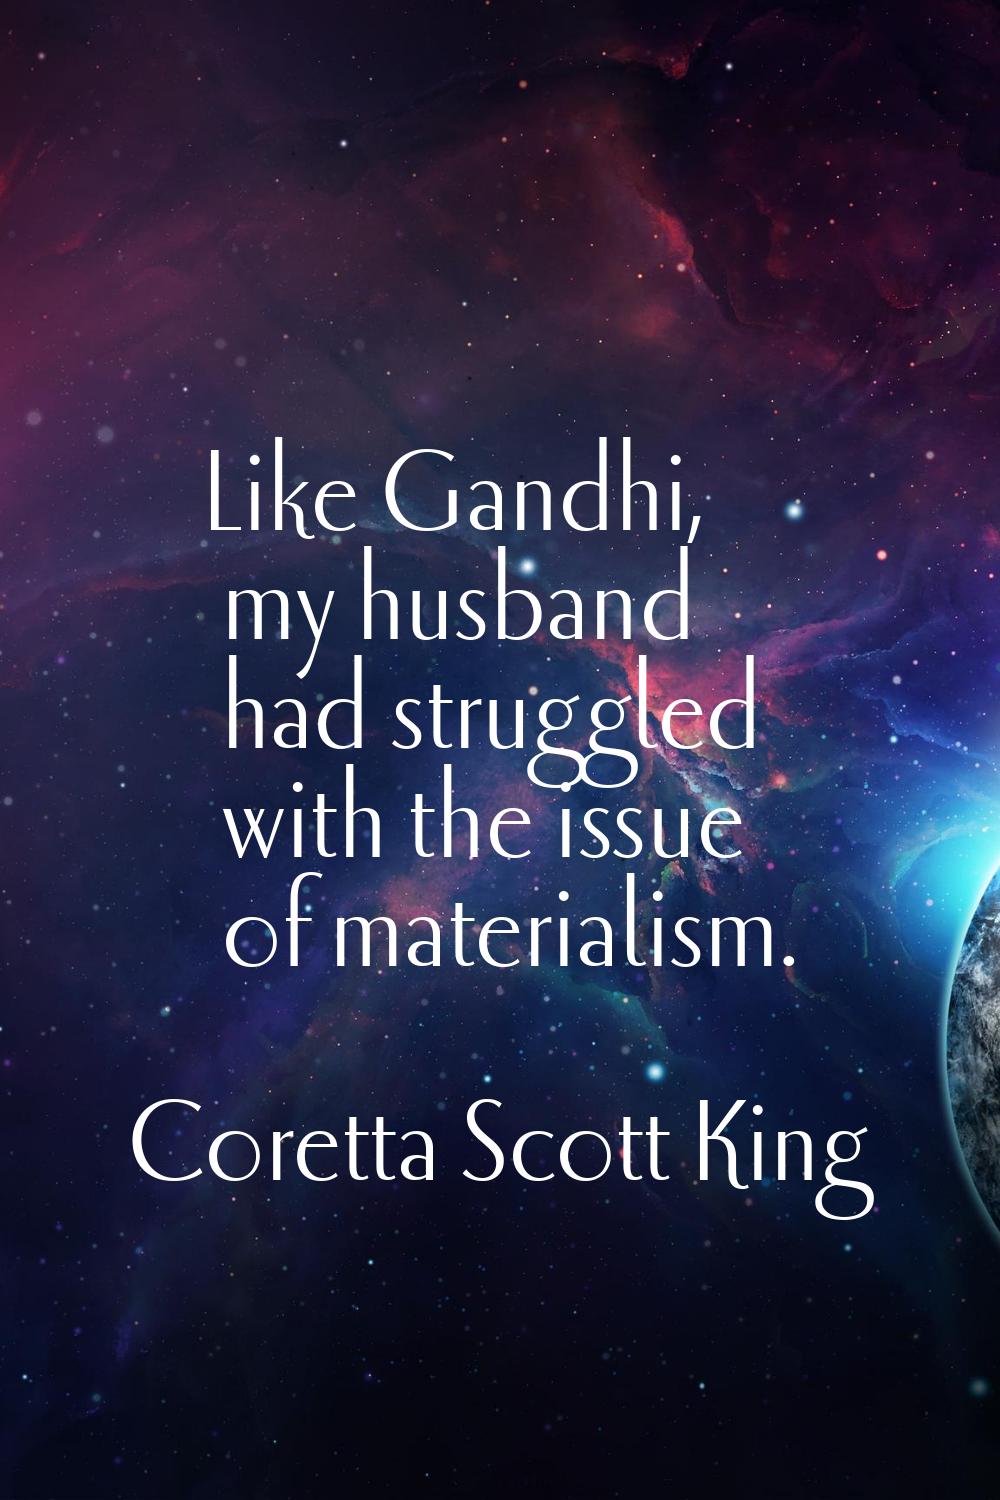 Like Gandhi, my husband had struggled with the issue of materialism.